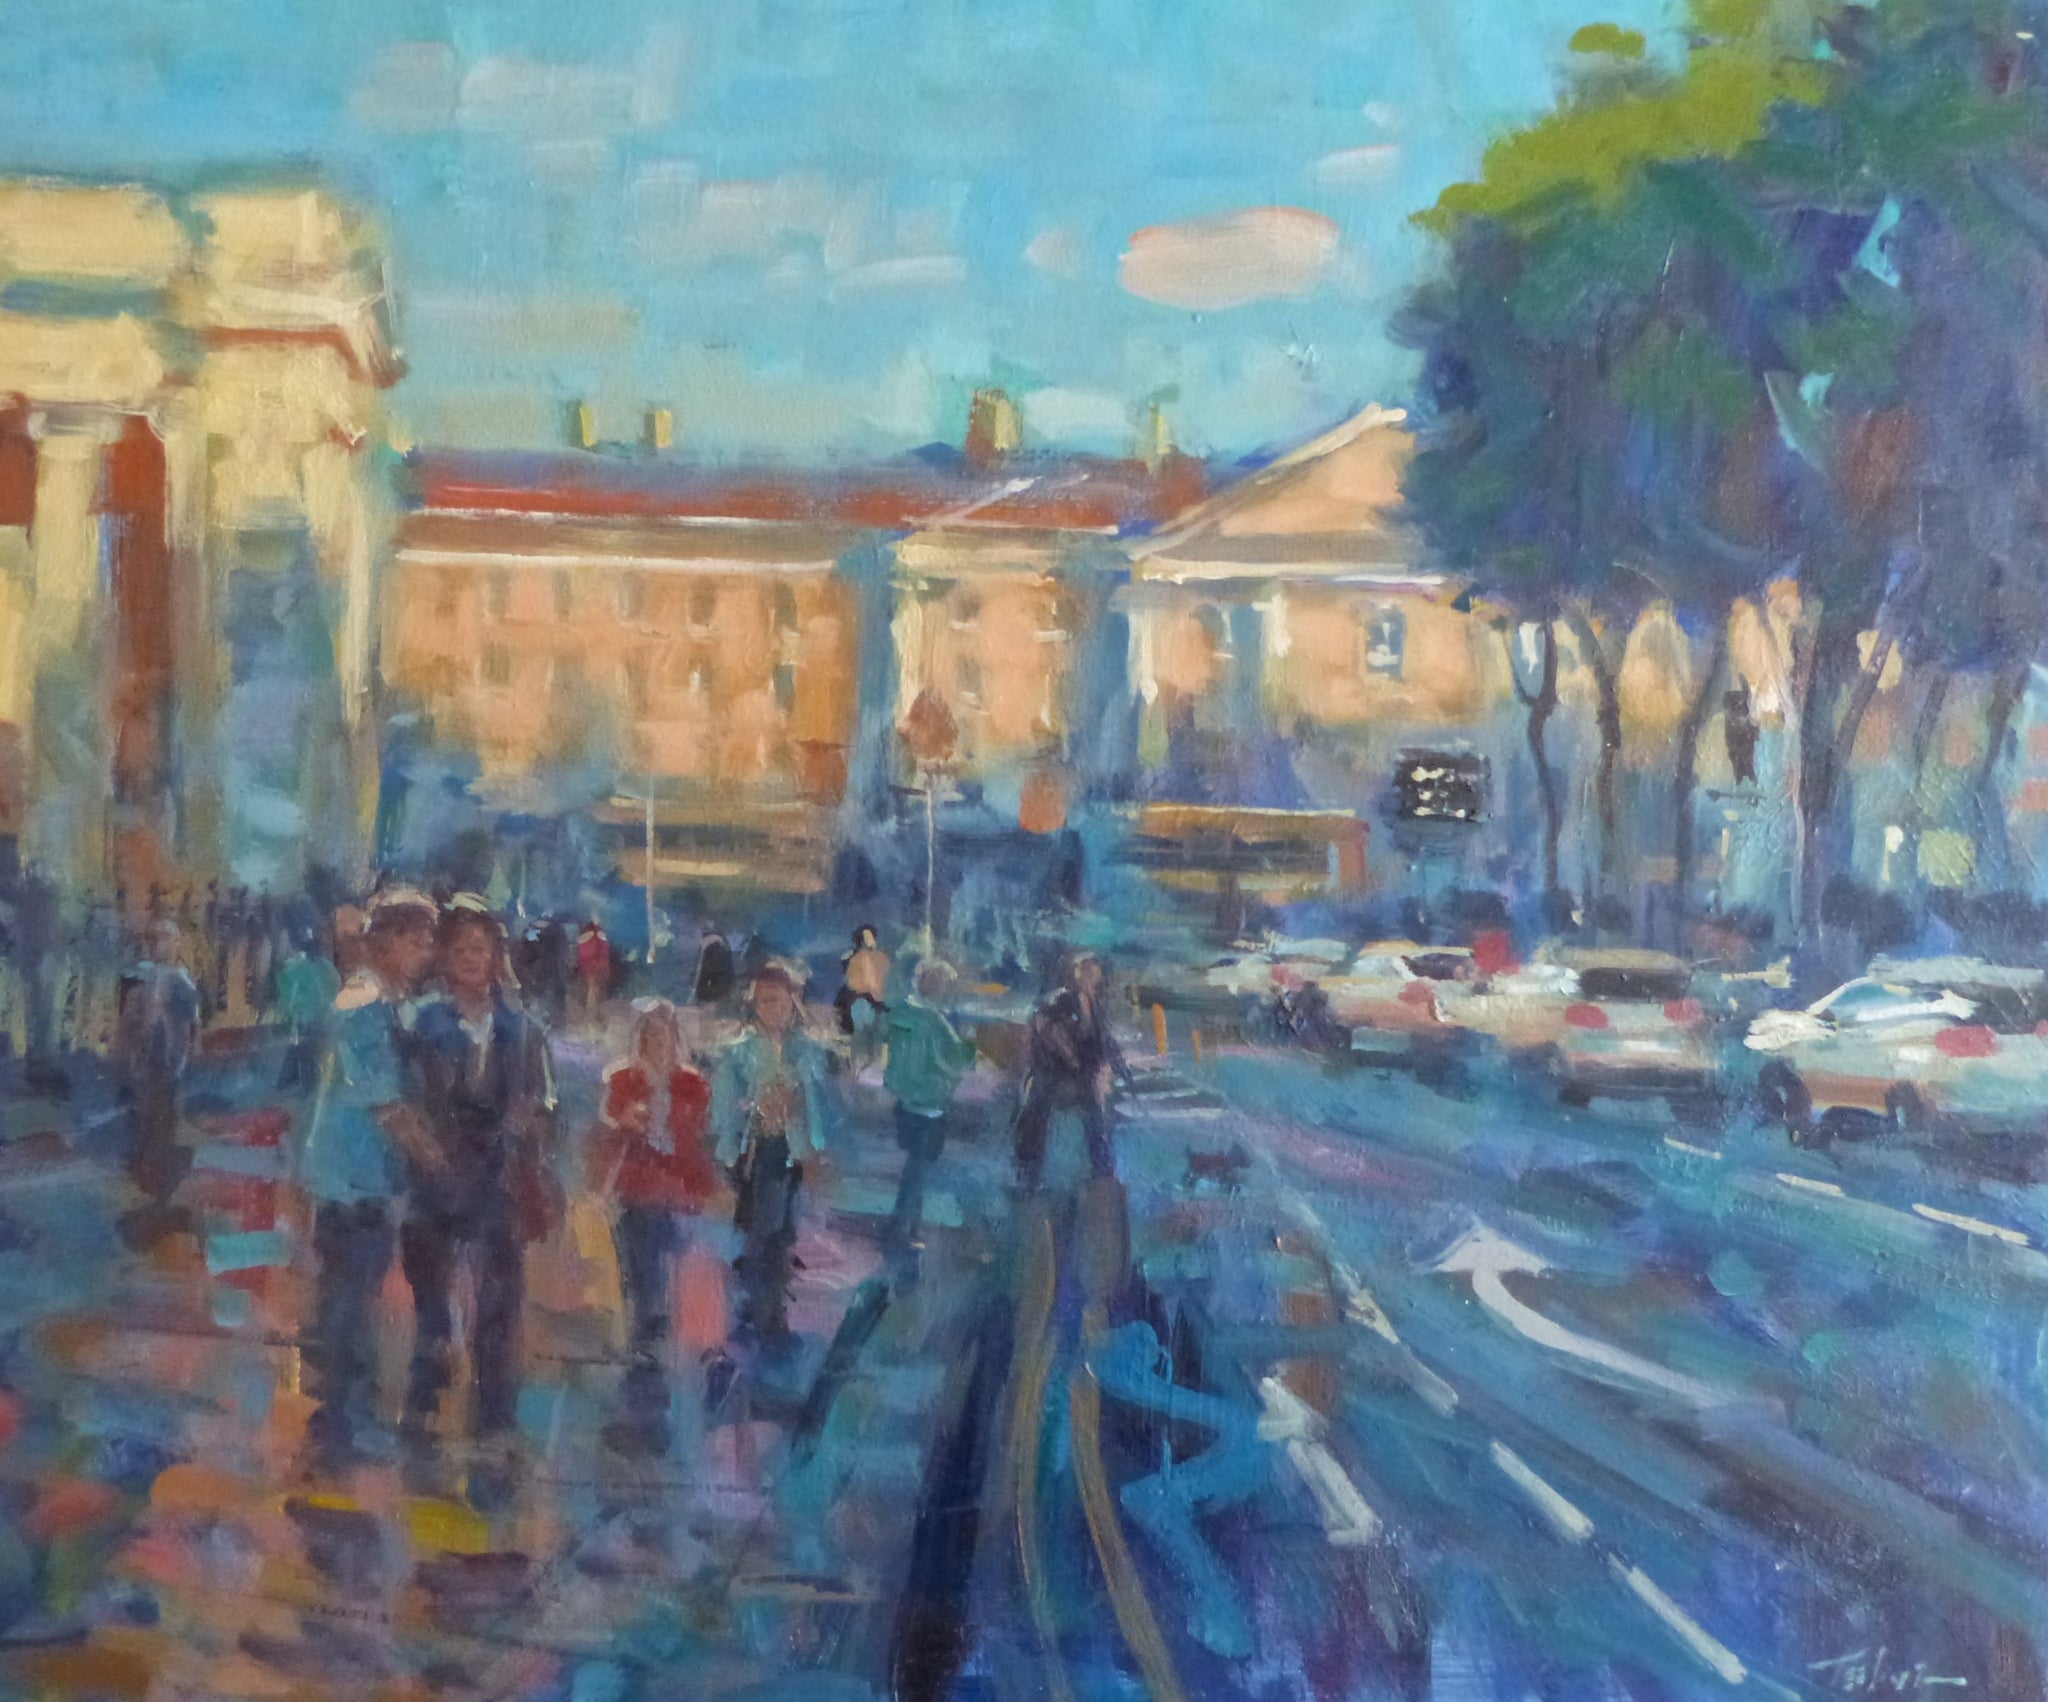 Norman Teeling "Late Afternoon on Dame Street Dublin"